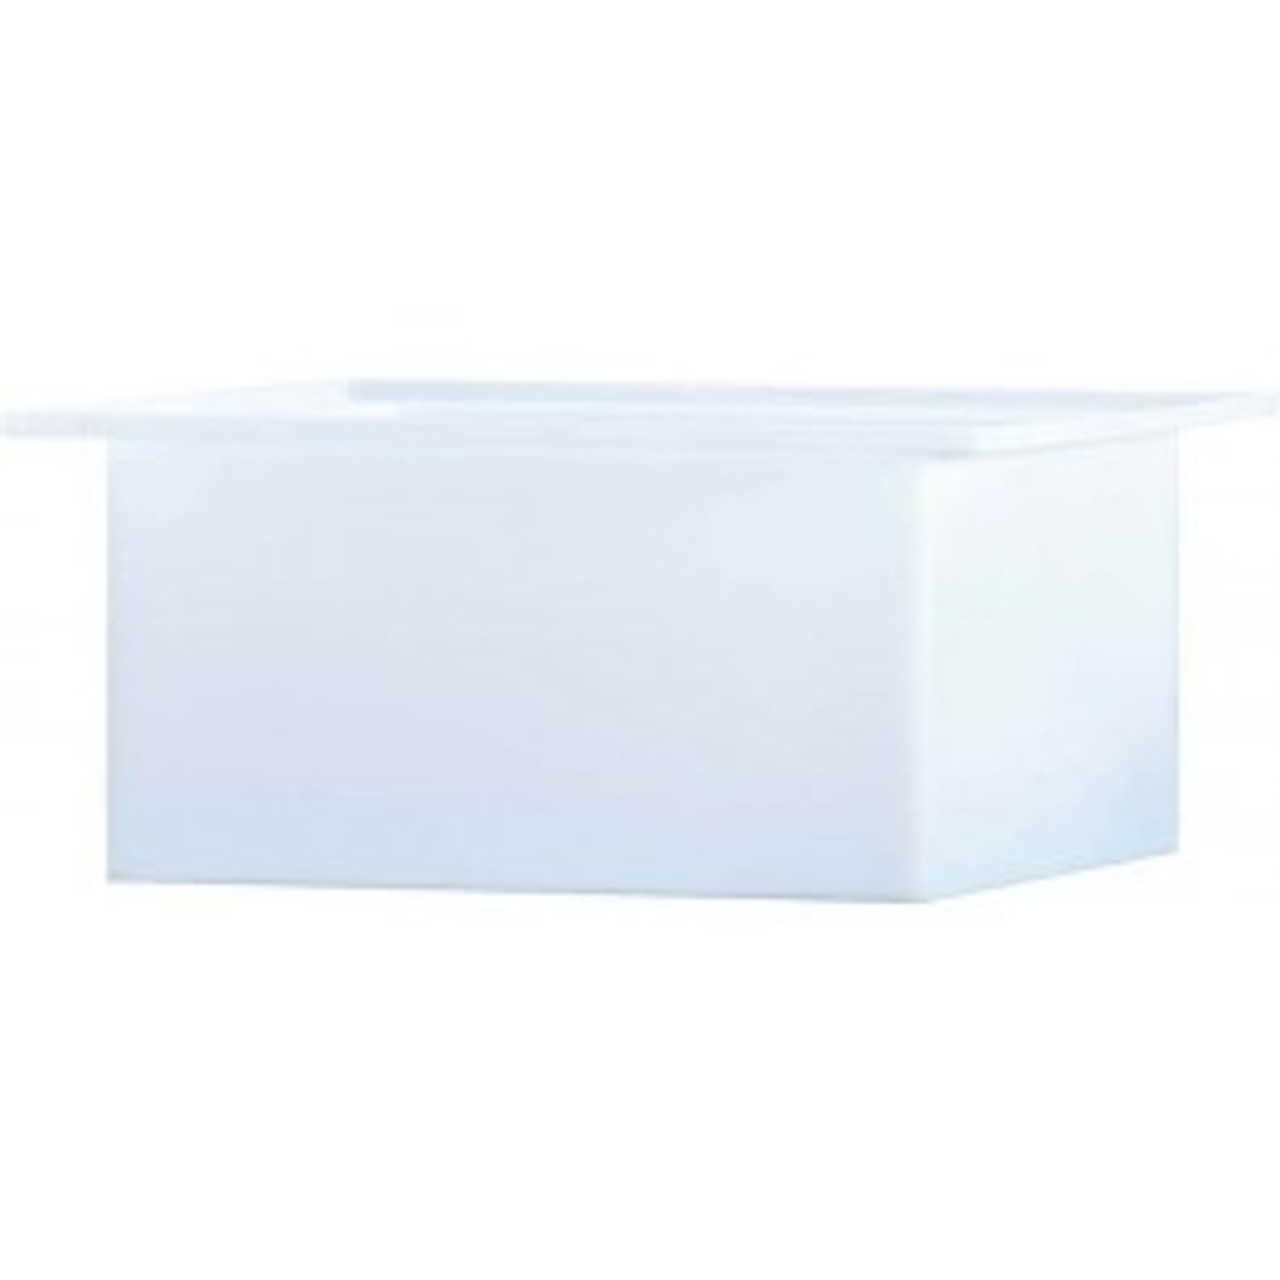 An image of a 112 Gallon PE Chem-Tainer White Rectangular Open Top Tank | R366012A